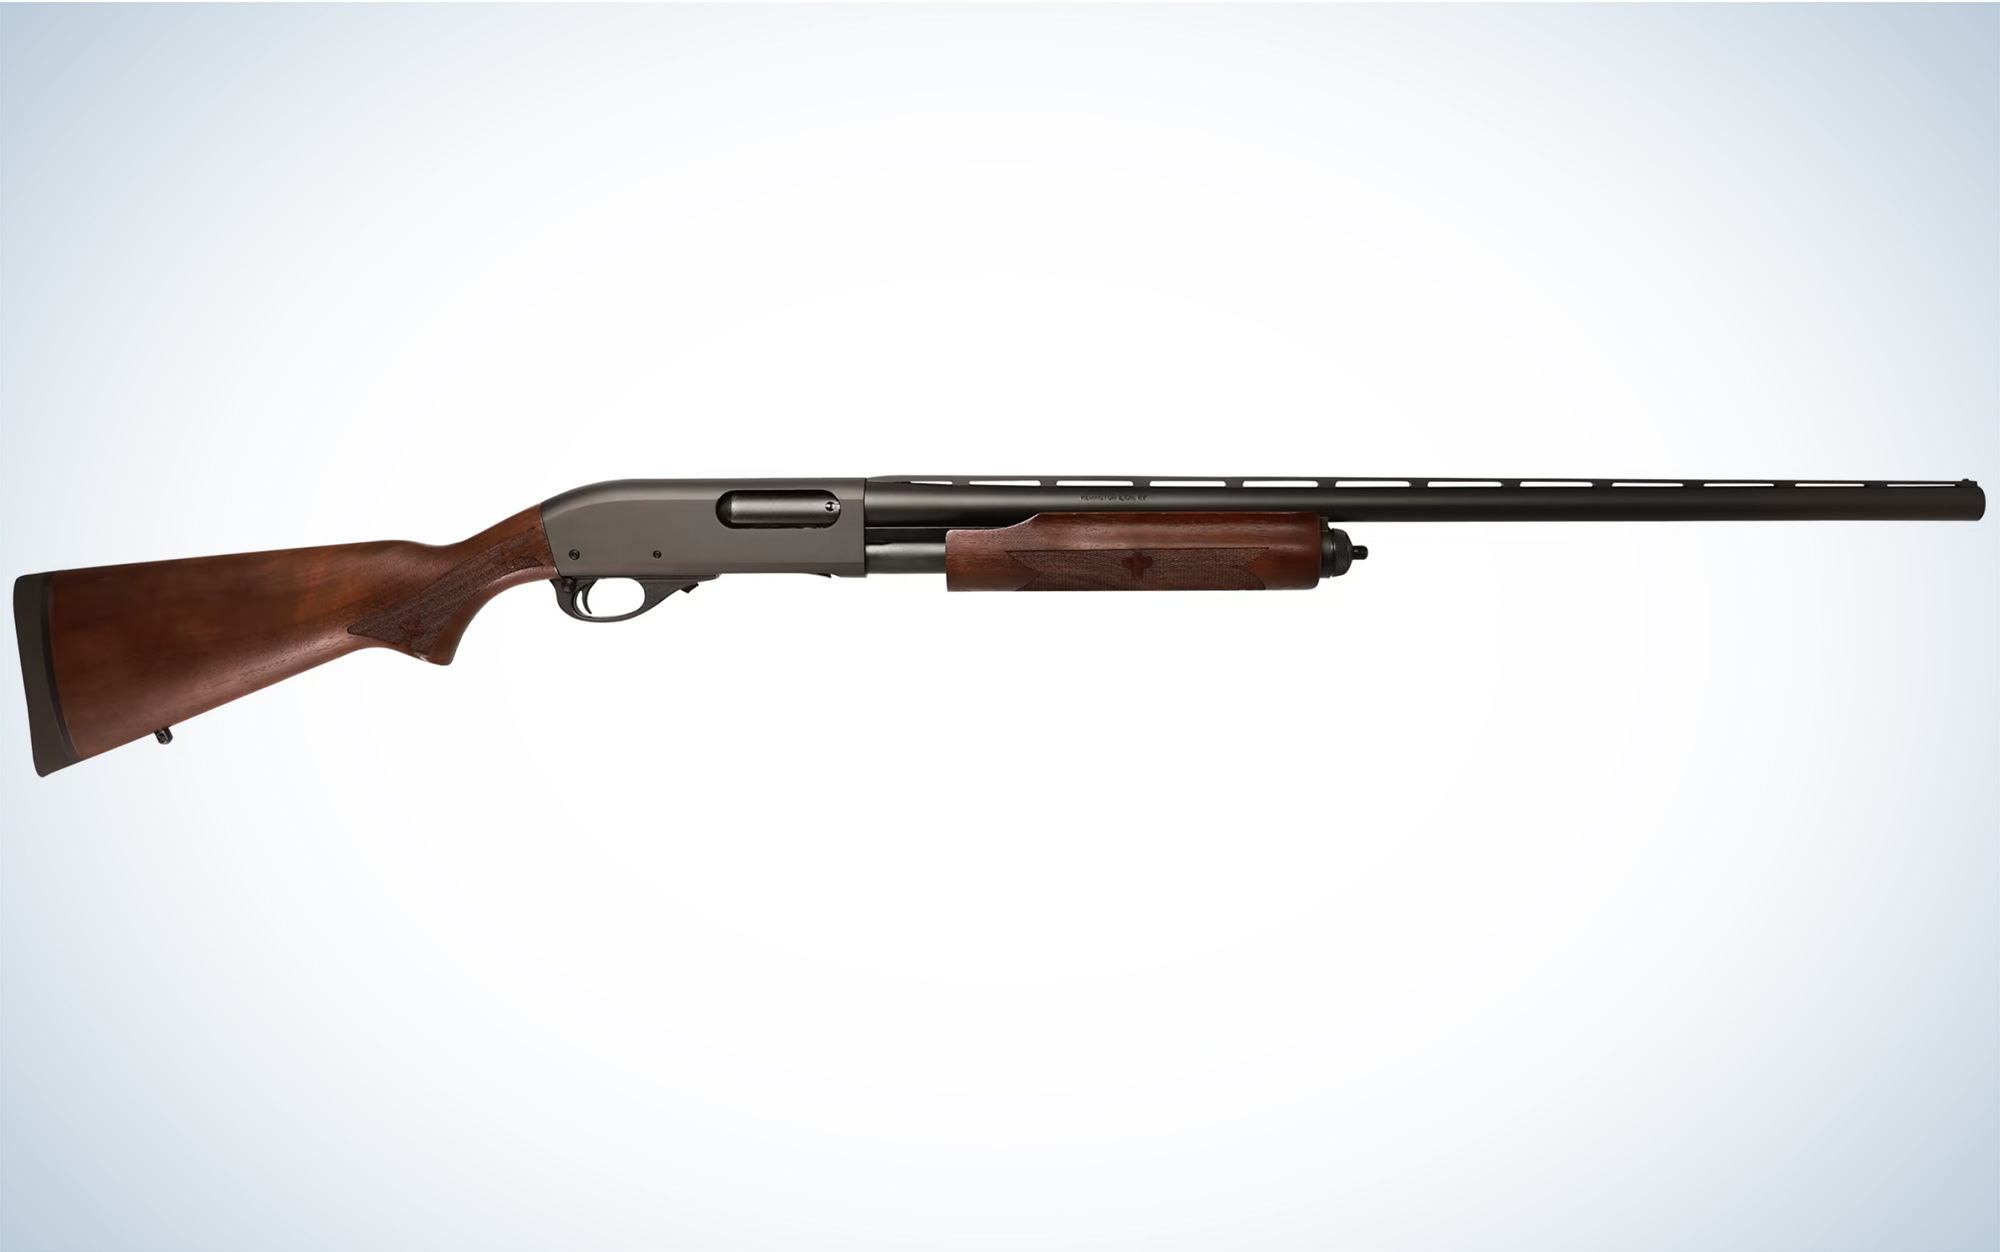 The Remington 870 Fieldmaster is one of the best shotguns for rabbit hunting.